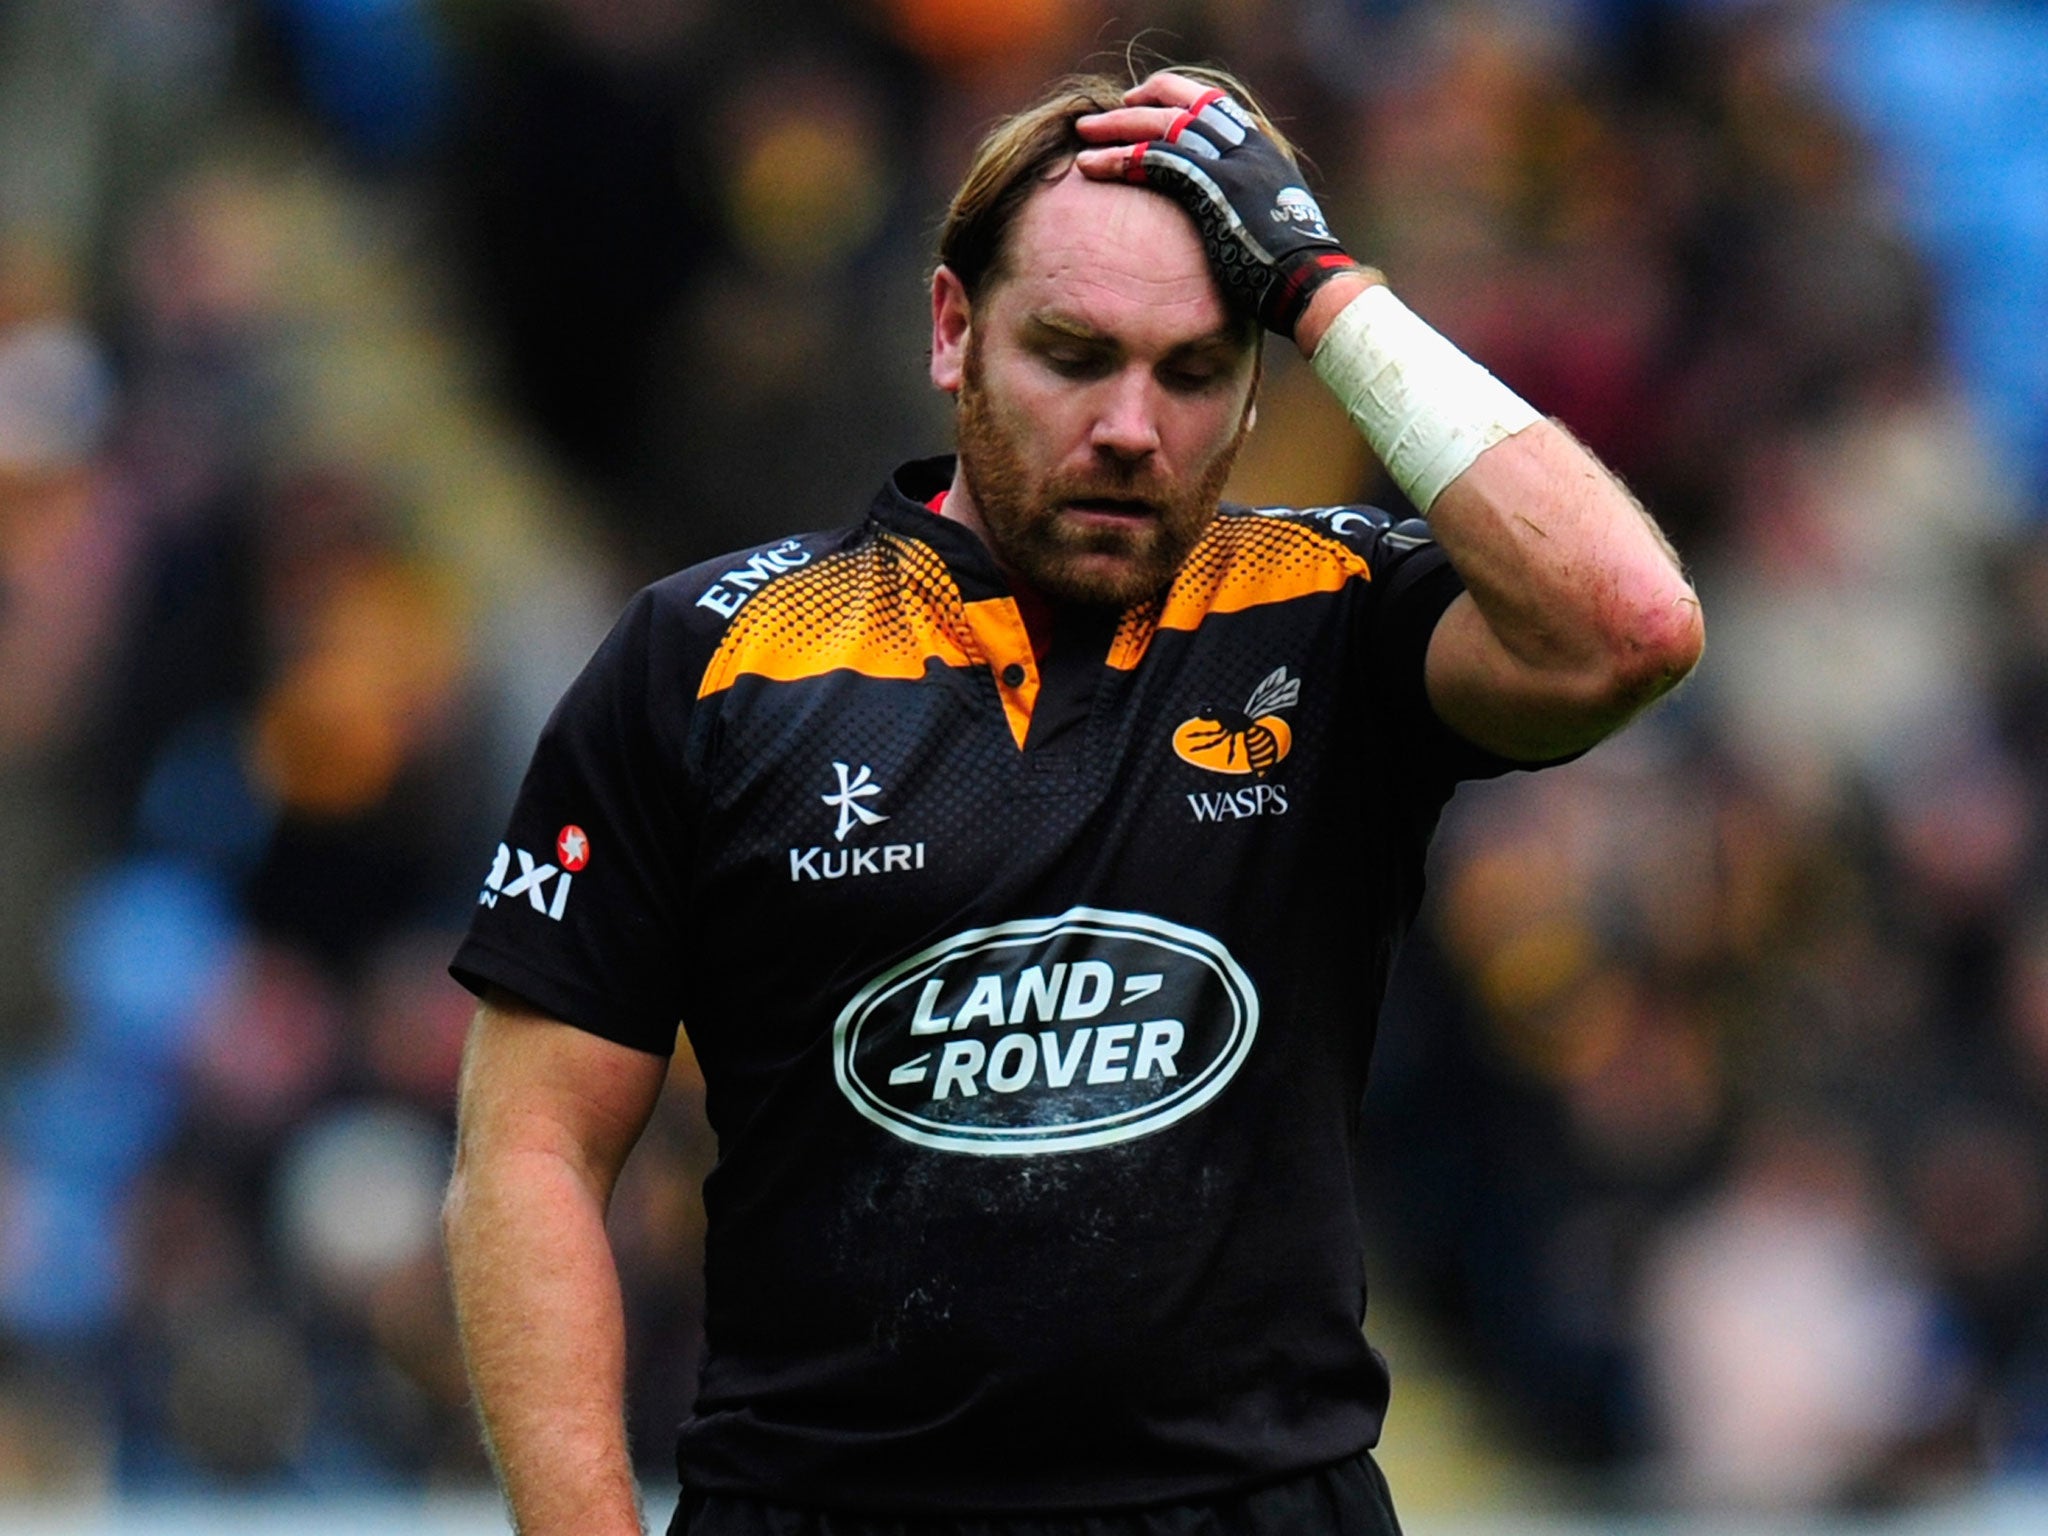 Andy Goode missed with a late drop-goal attempt that would have meant Wasps finished top